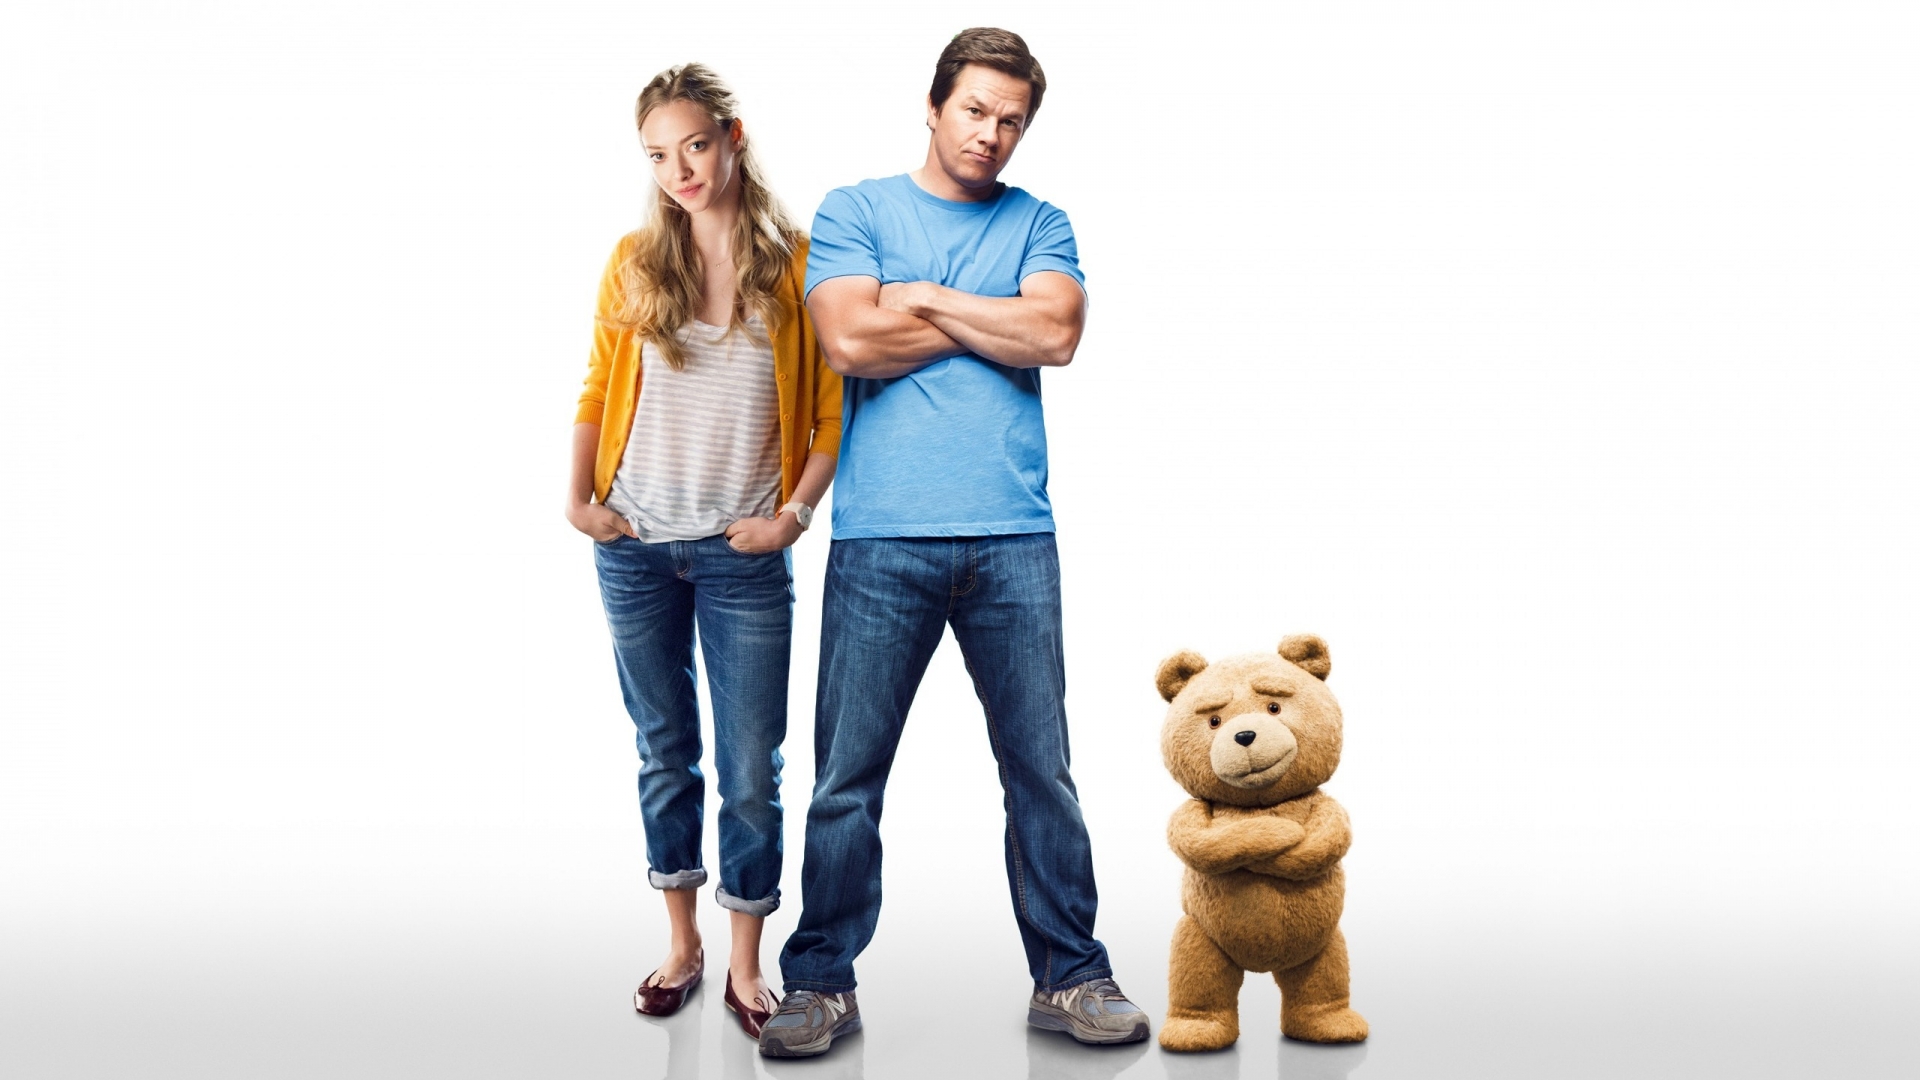 Ted 2 for 1920 x 1080 HDTV 1080p resolution